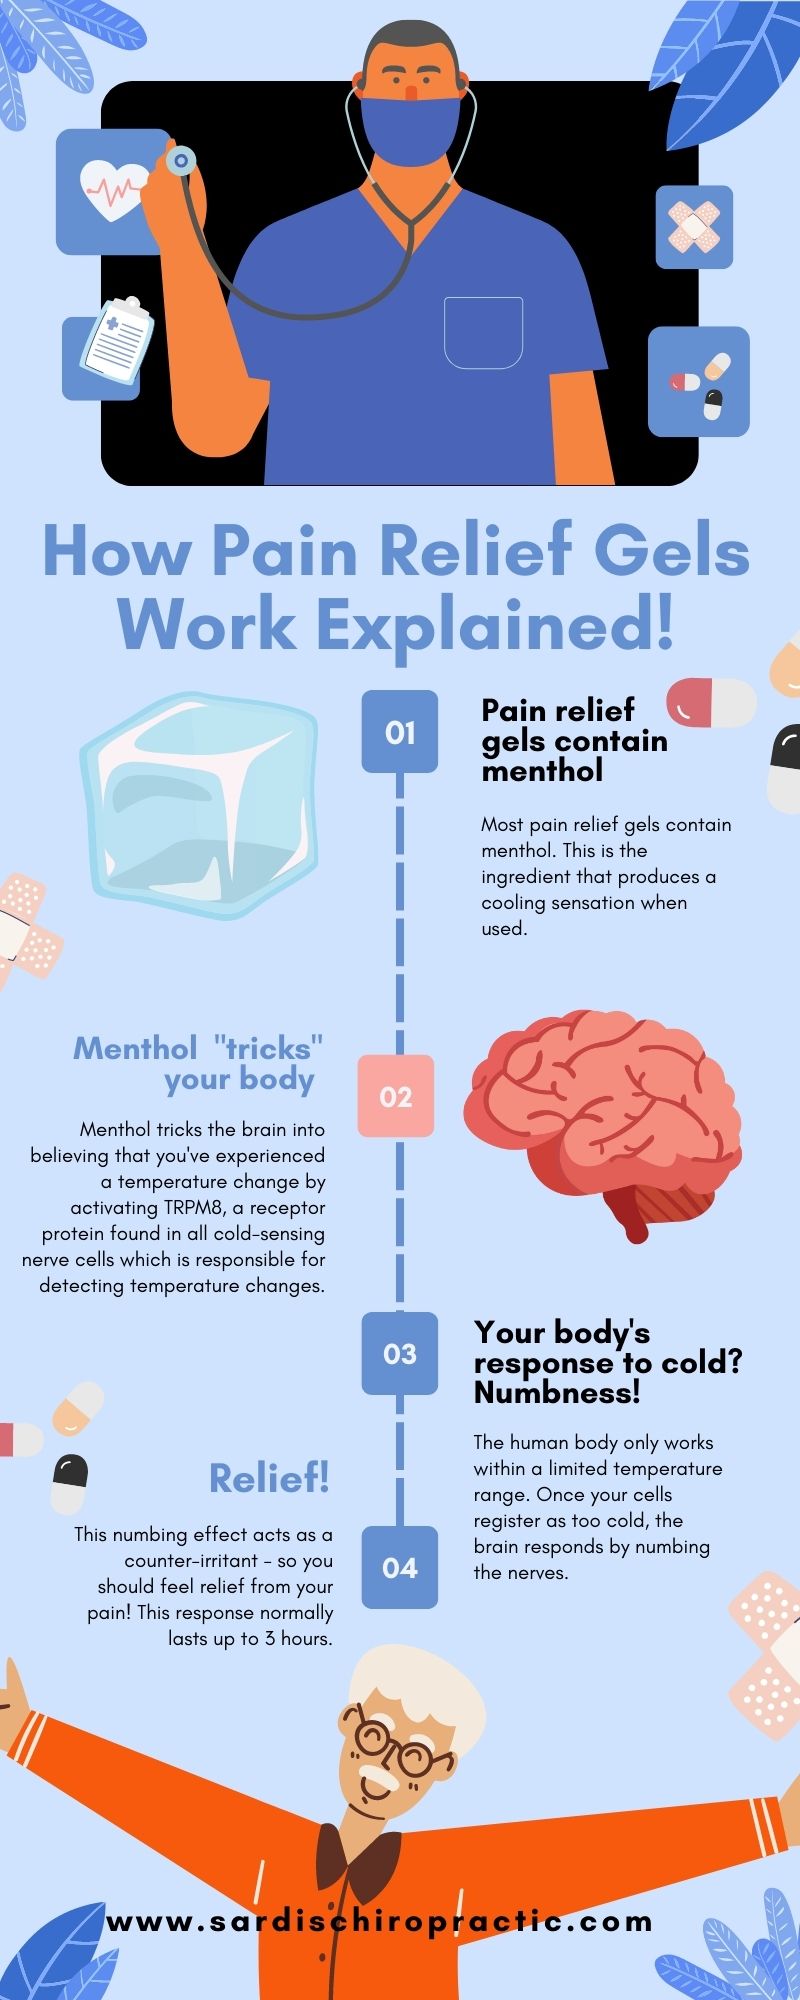 Explanation of how menthol pain relief gel works. Infographic reads: How Pain Relief Gels Work Explained 01. Pain relief gels contain menthol. Most pain relief gels contain menthol. This is the ingredient that produces a cooling sensation when used. 02. Menthol "tricks" your body. Menthol tricks the brain into believing that you've experienced a temperature change by activating TRPM8, a receptor protein found in all cold-sensing nerve cells which are responsible for detecting temperature changes. 03. Your body's response to cold? Numbness! The human body only works within a limited temperature range. Once your cells register as too cold, the brain responds by numbing the nerves. 04. Relief! This numbing effect works as a counter-irritant - so you should feel relief from your pain! This response normally lasts up to 3 hours. 